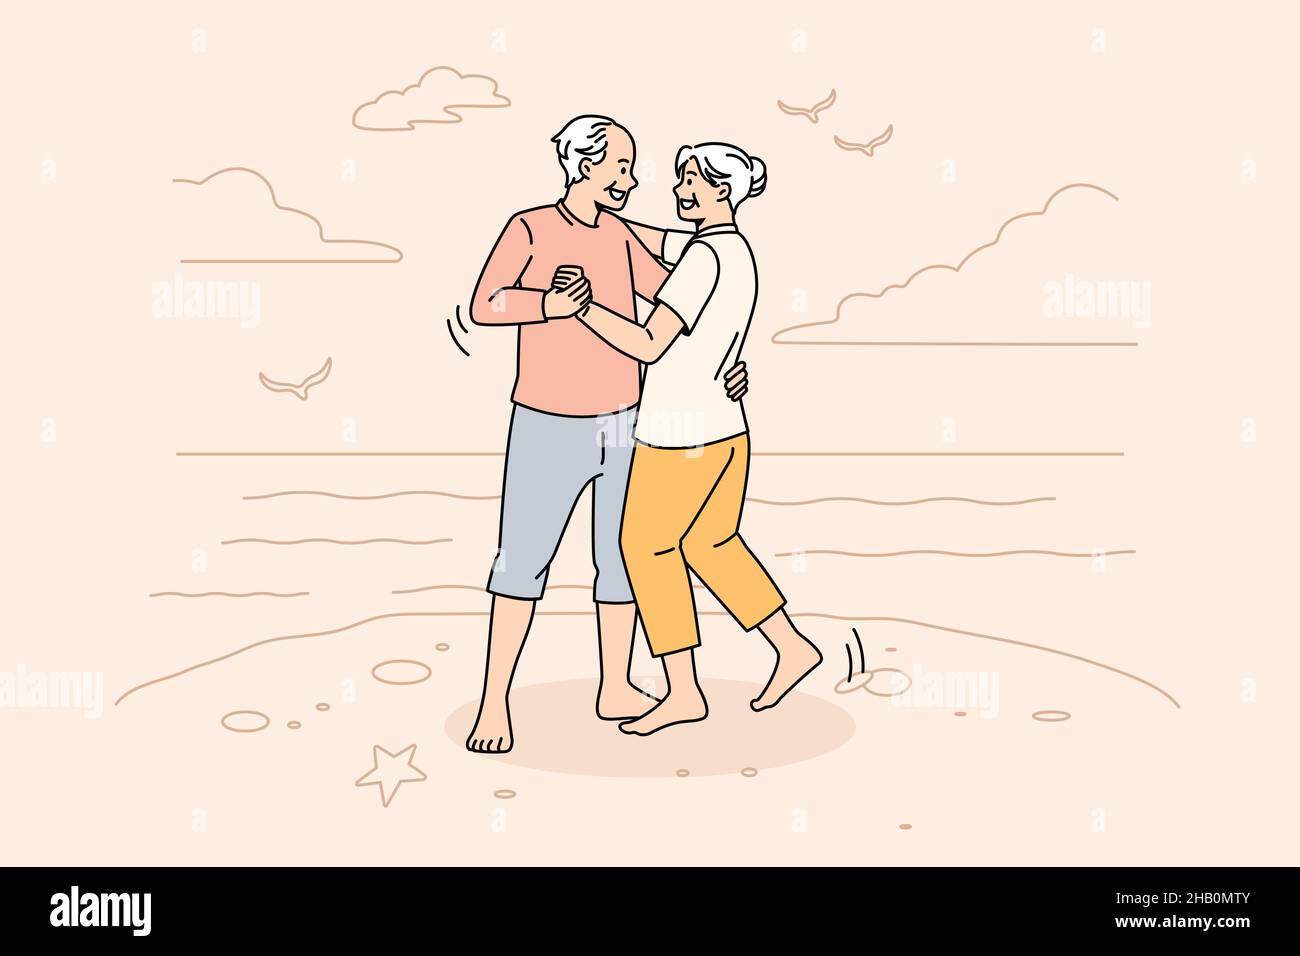 Happy active lifestyle of mature people concept. Smiling happy positive elderly couple man and woman standing dancing and enjoying weekend on beach vector illustration  Stock Vector